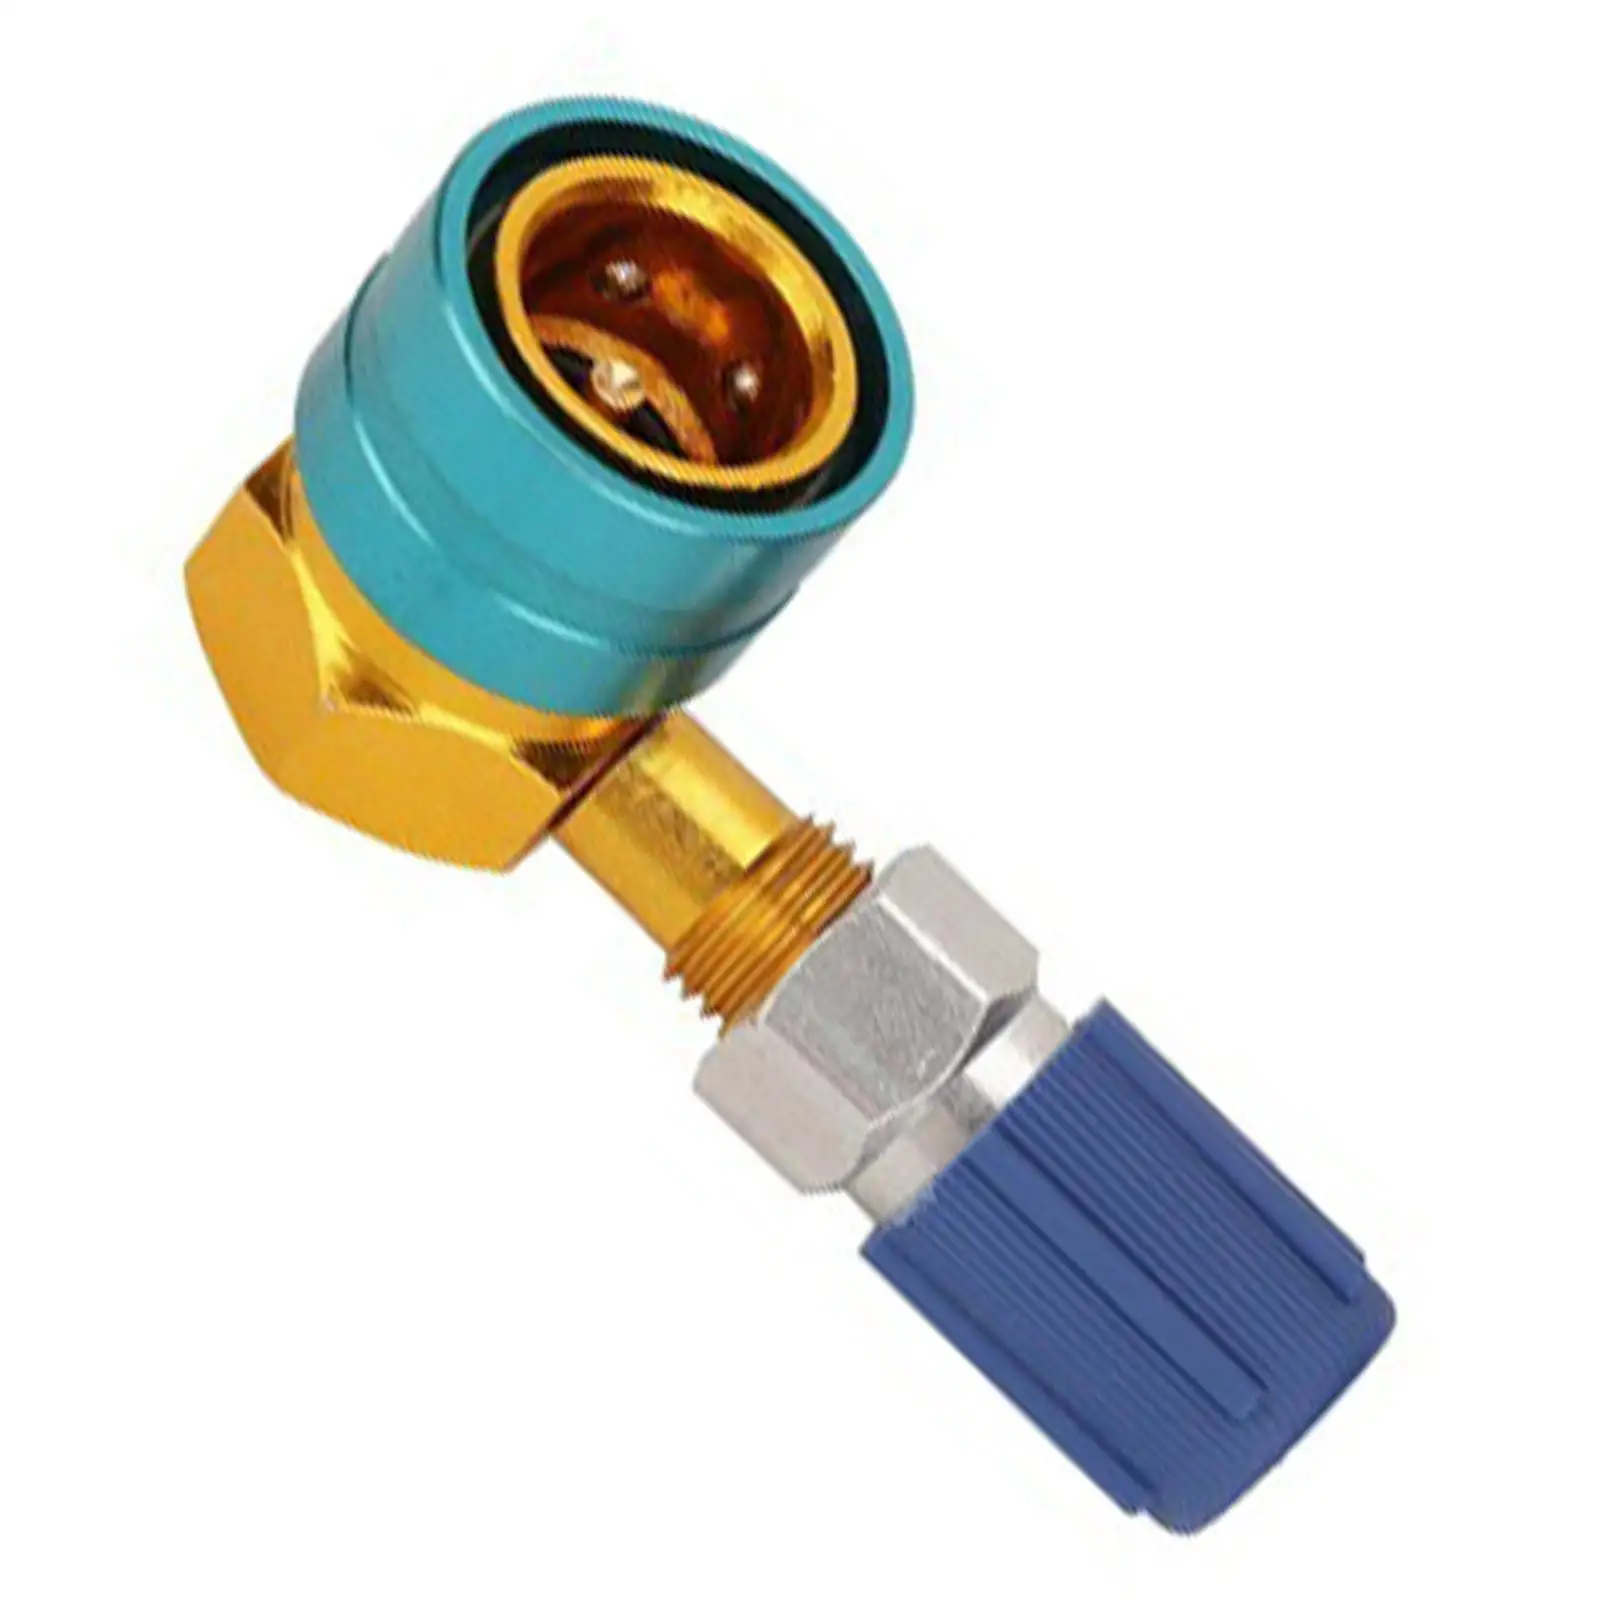 AC R134A R1234yf Quick Coupler Adapter 90 Degrees for AC Refrigerant Charging Easy Installation Stable Performance Quality